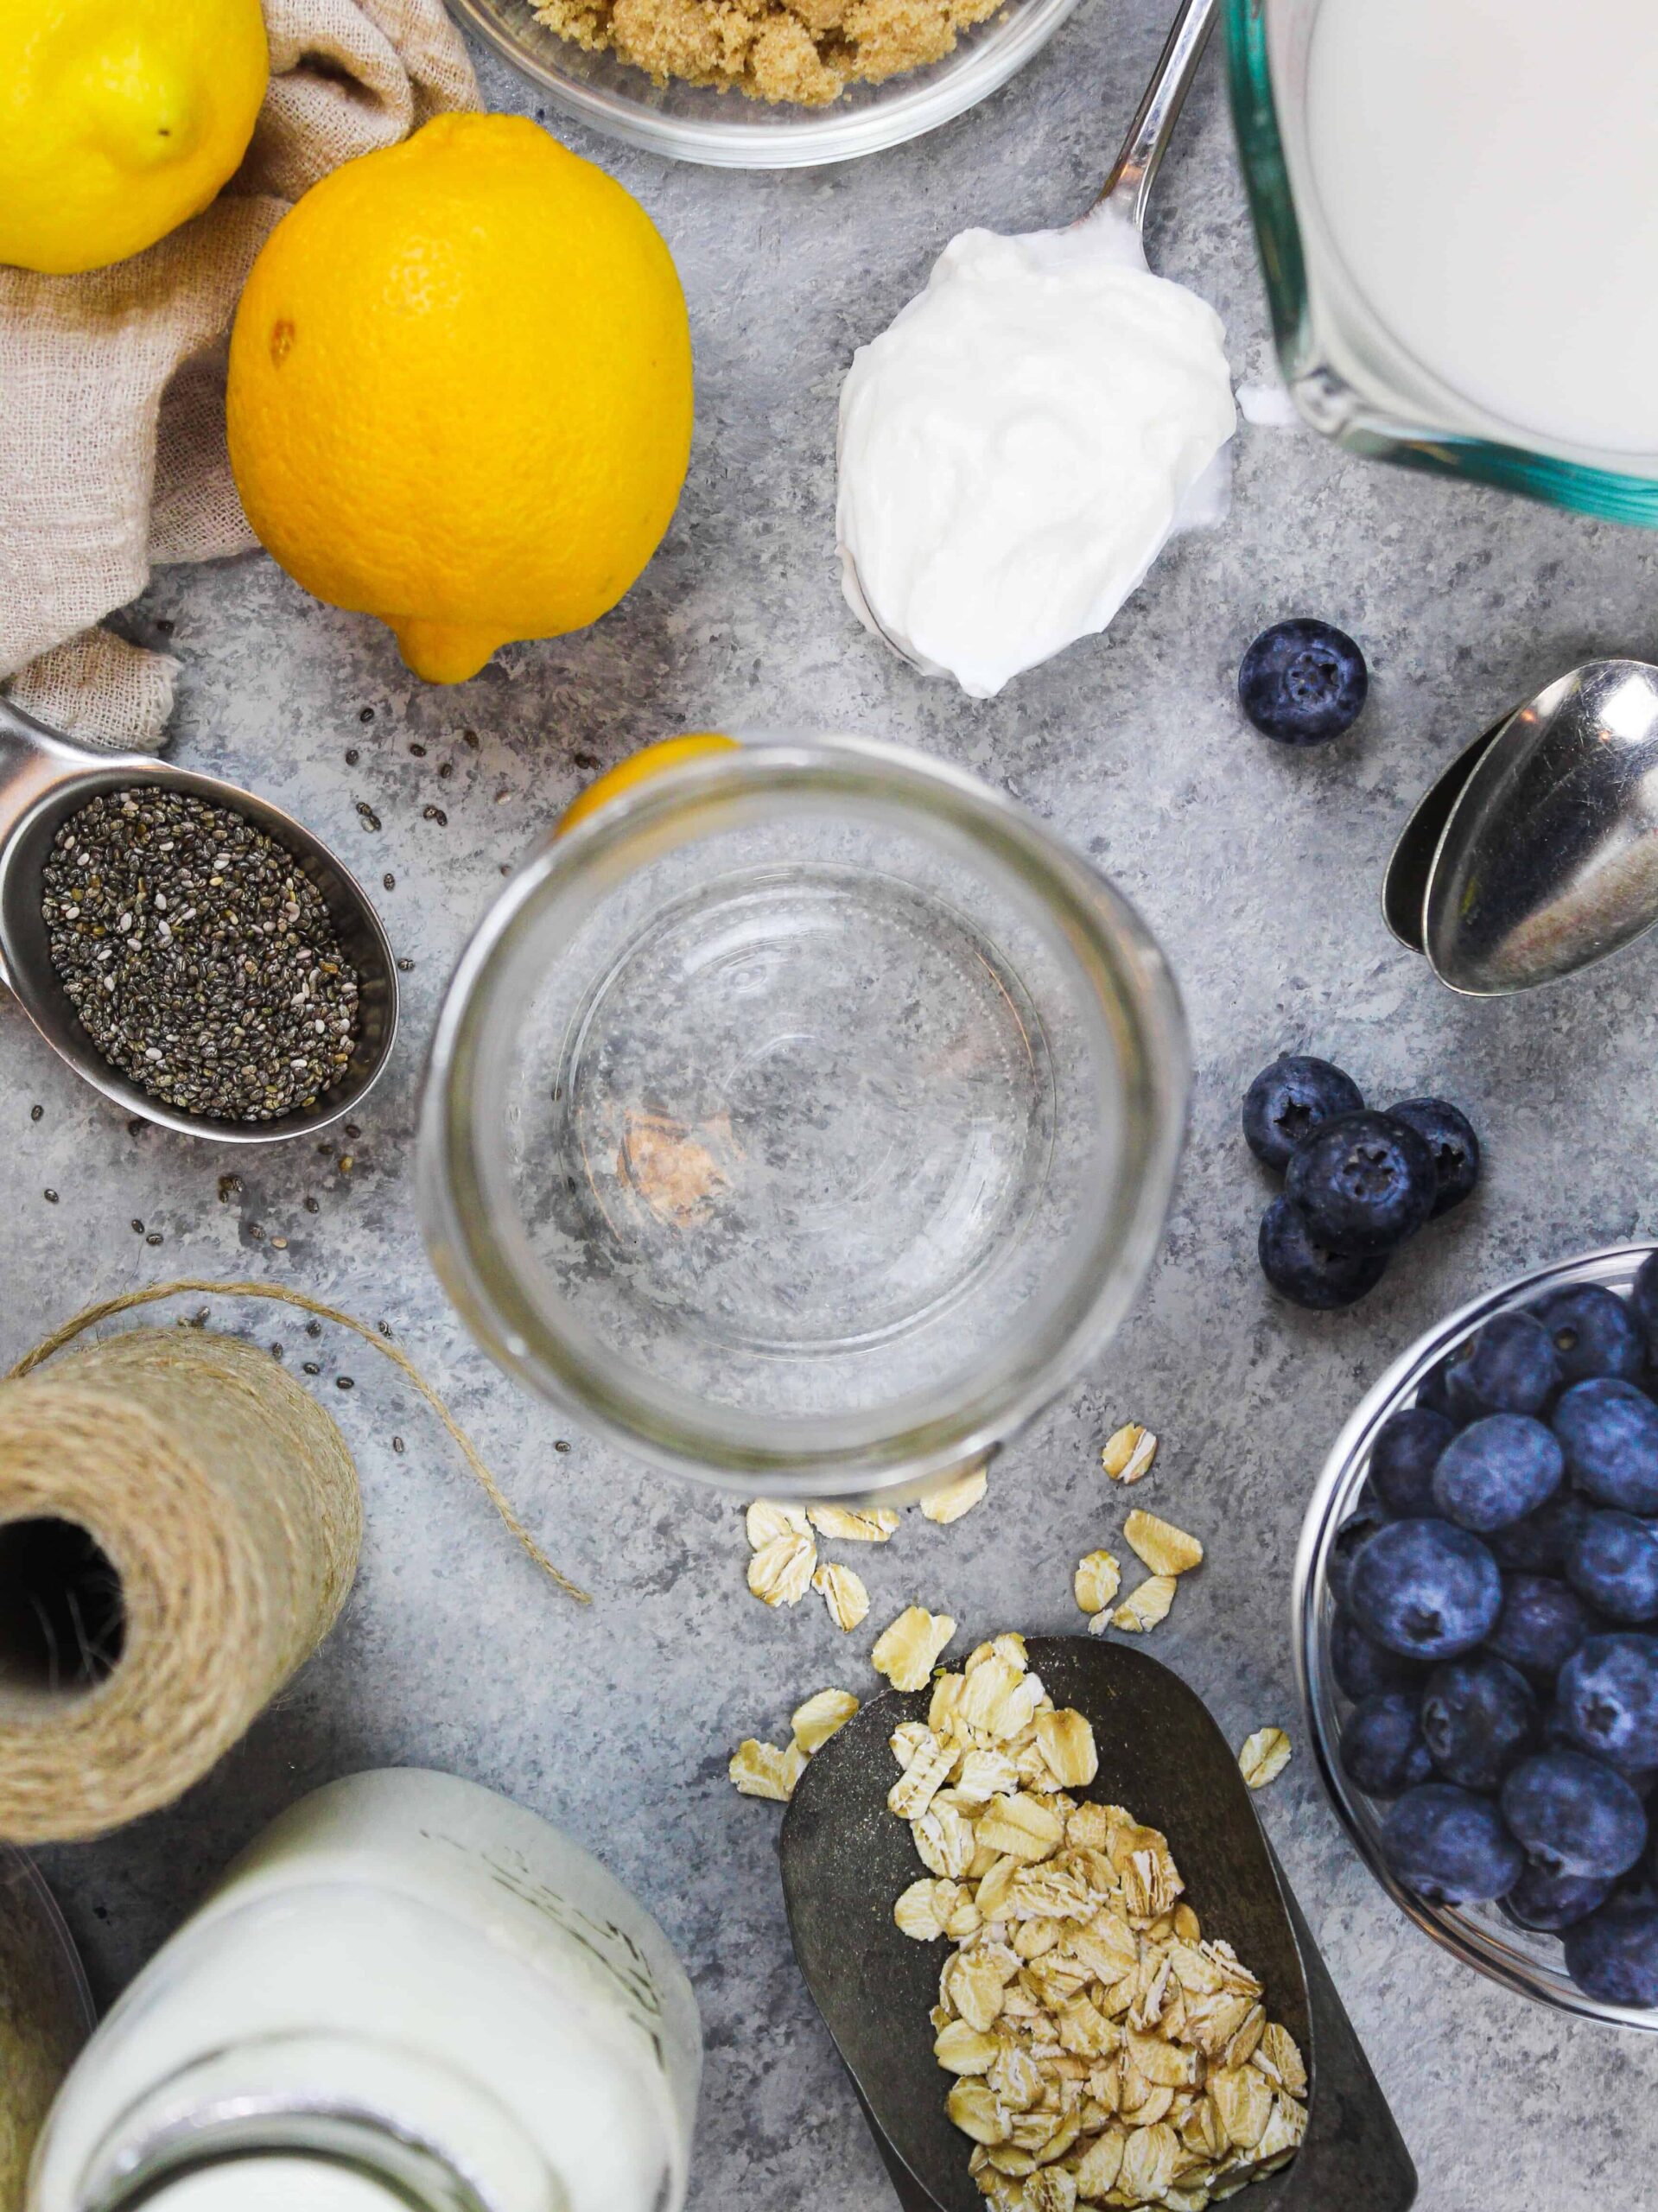 image of ingredients laid out to make lemon blueberry overnight oats